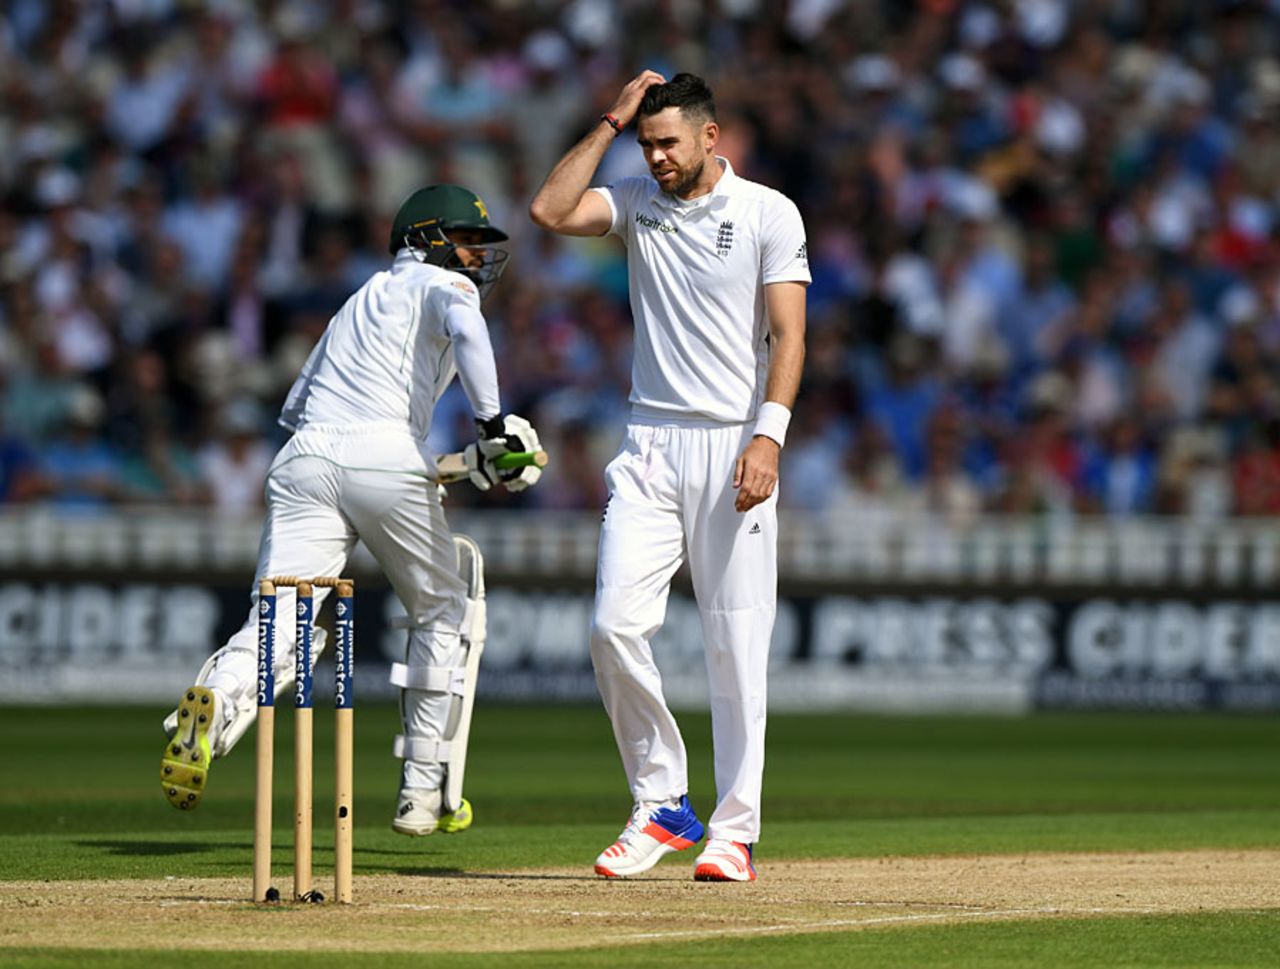 It was a frustrating day for James Anderson, England v Pakistan, 3rd Investec Test, Edgbaston, 2nd day, August 4, 2016